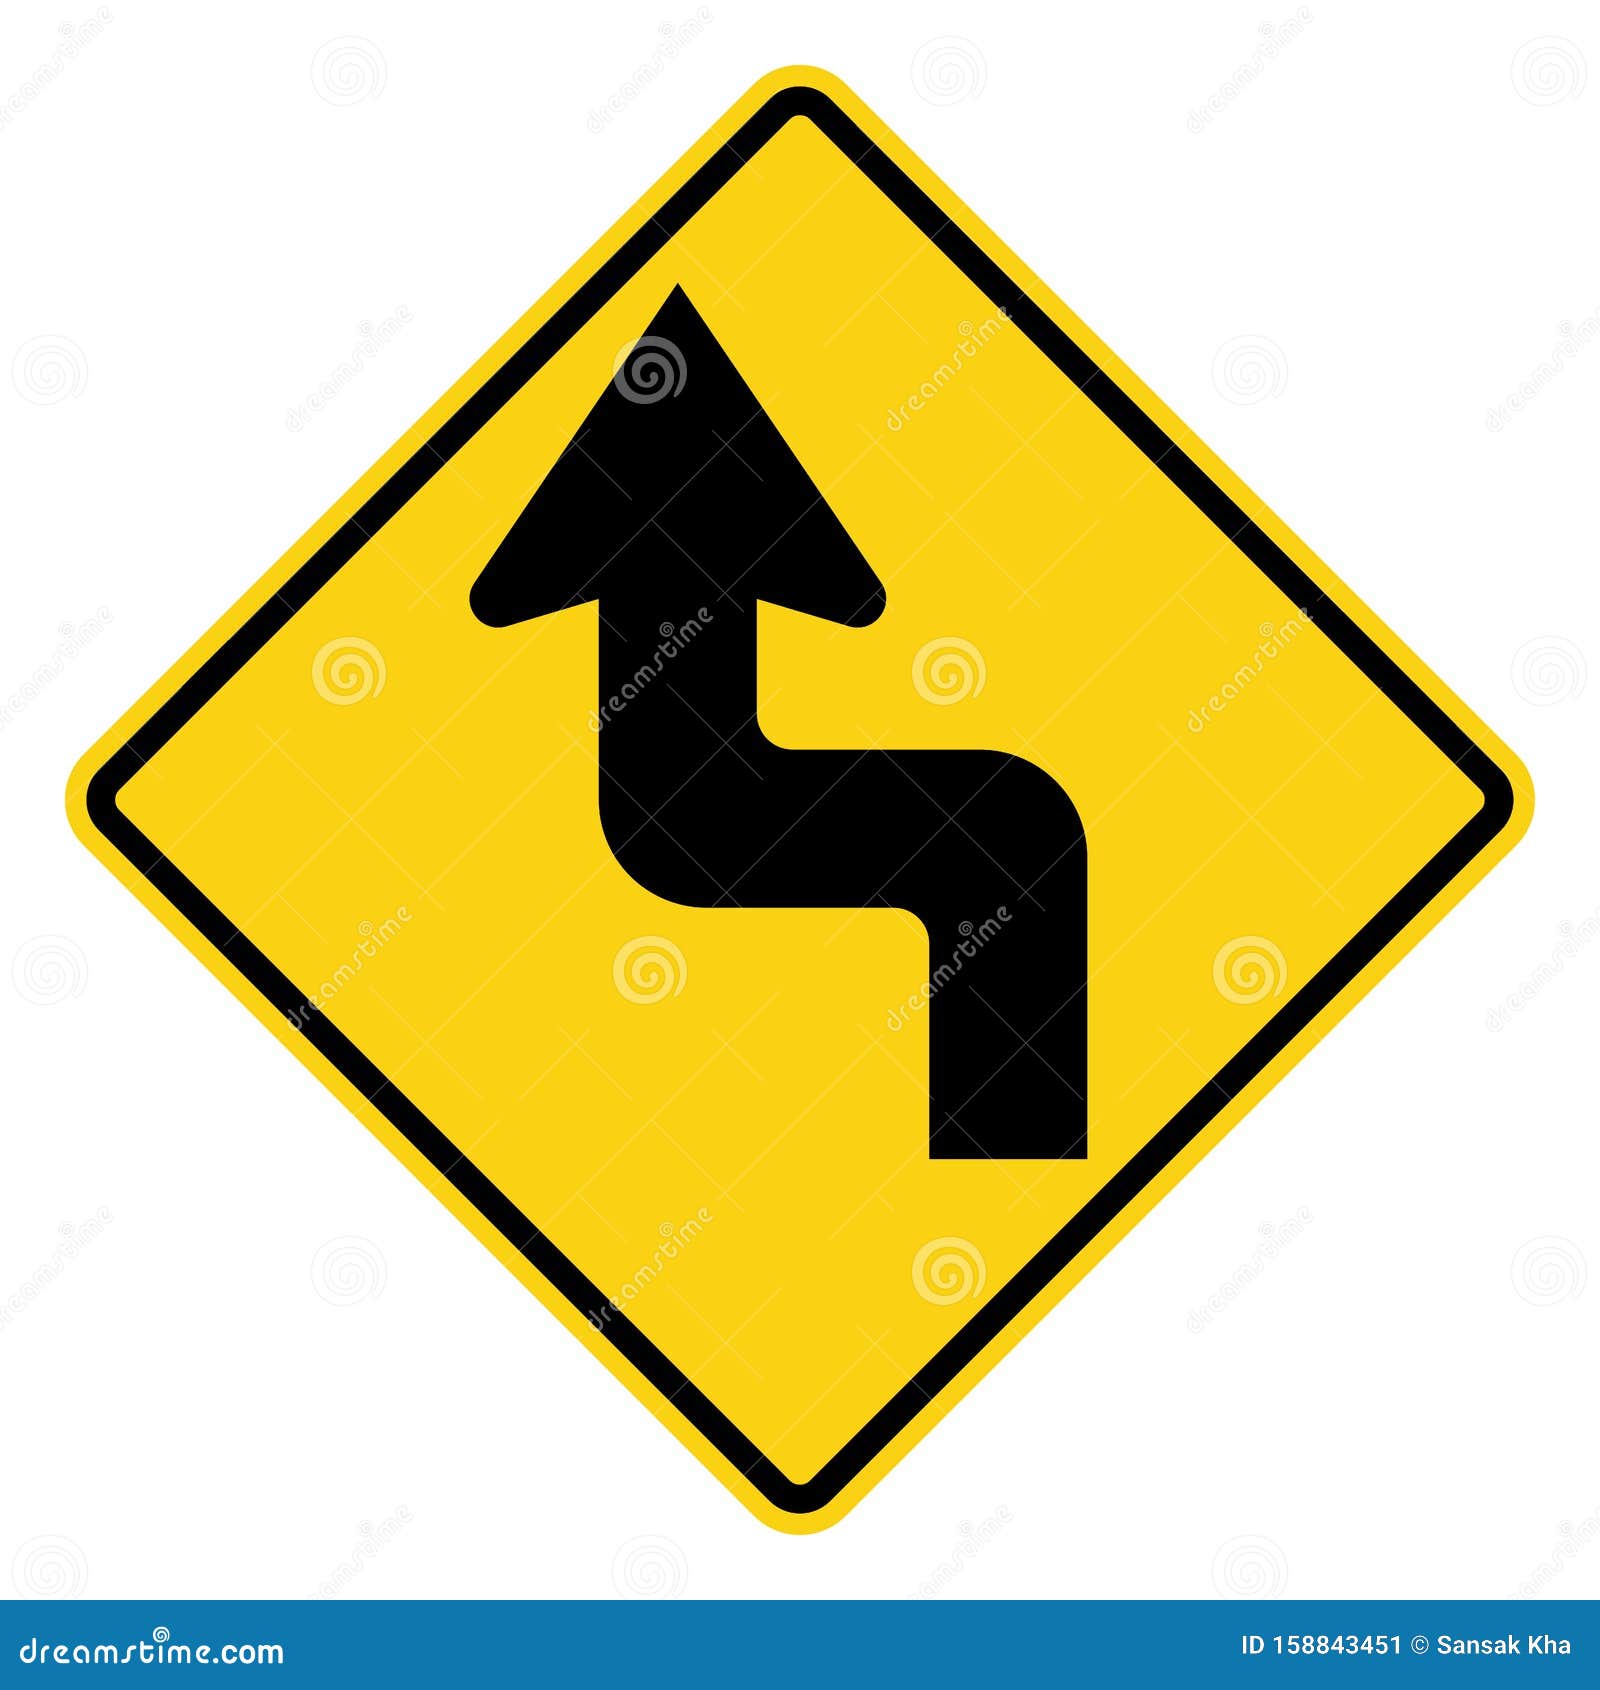 Traffic Signs,Warning Signs,Sharp double curve, first to left. Traffic road signs set isolated on the white. Vector illustration.